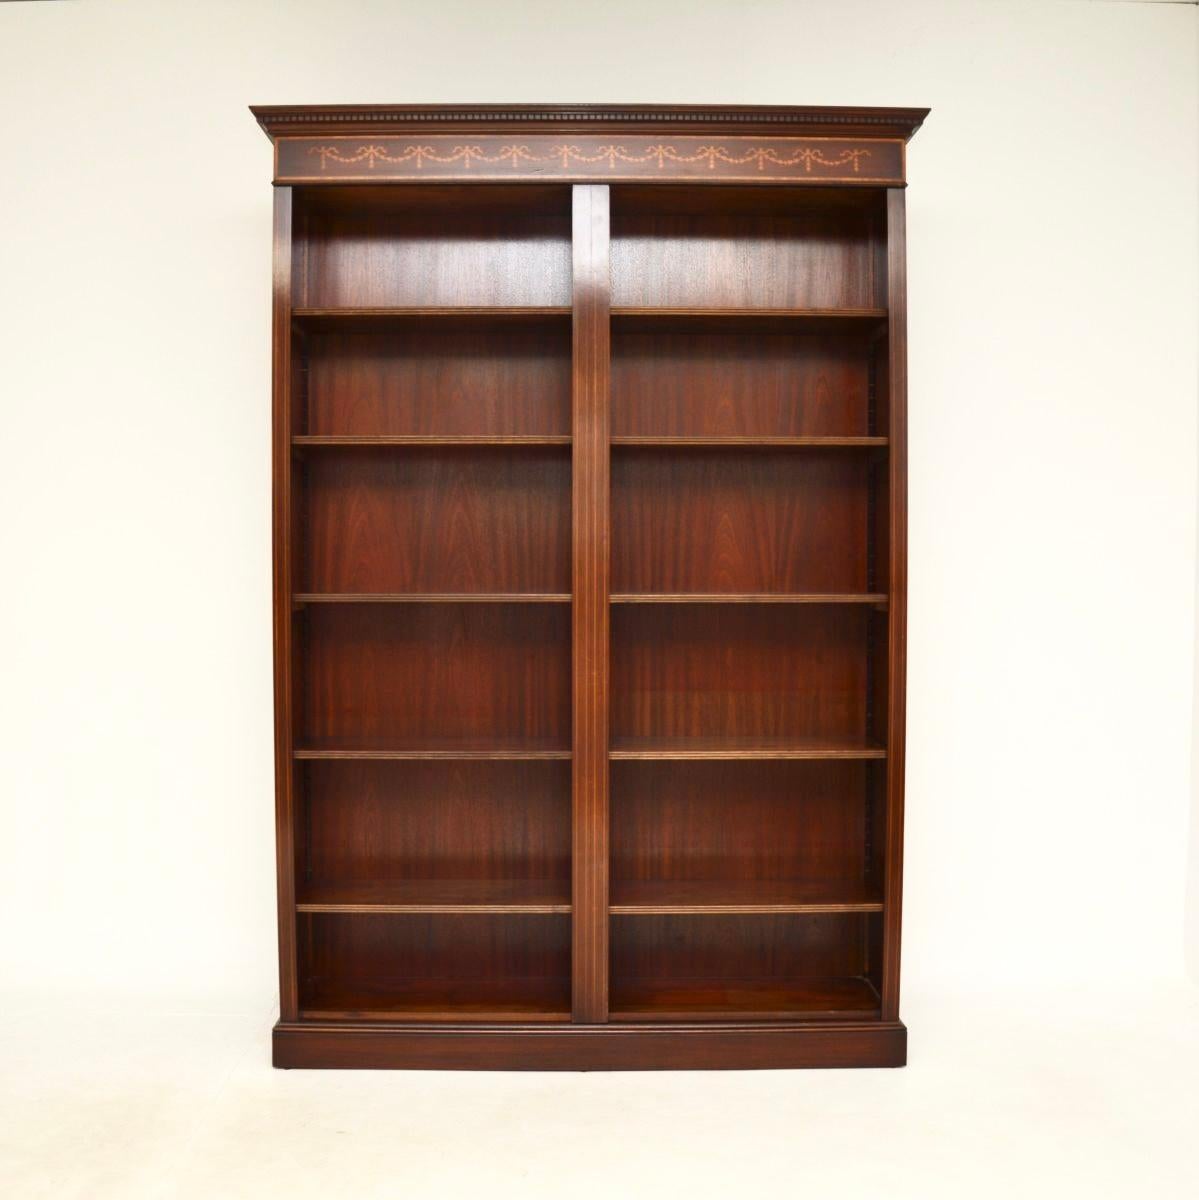 A large and impressive antique Georgian style open bookcase. This was made in England, it dates from around the 1950’s.

It is of superb quality and is a very useful size. It is very large and has lots of storage space, yet is not too deep and